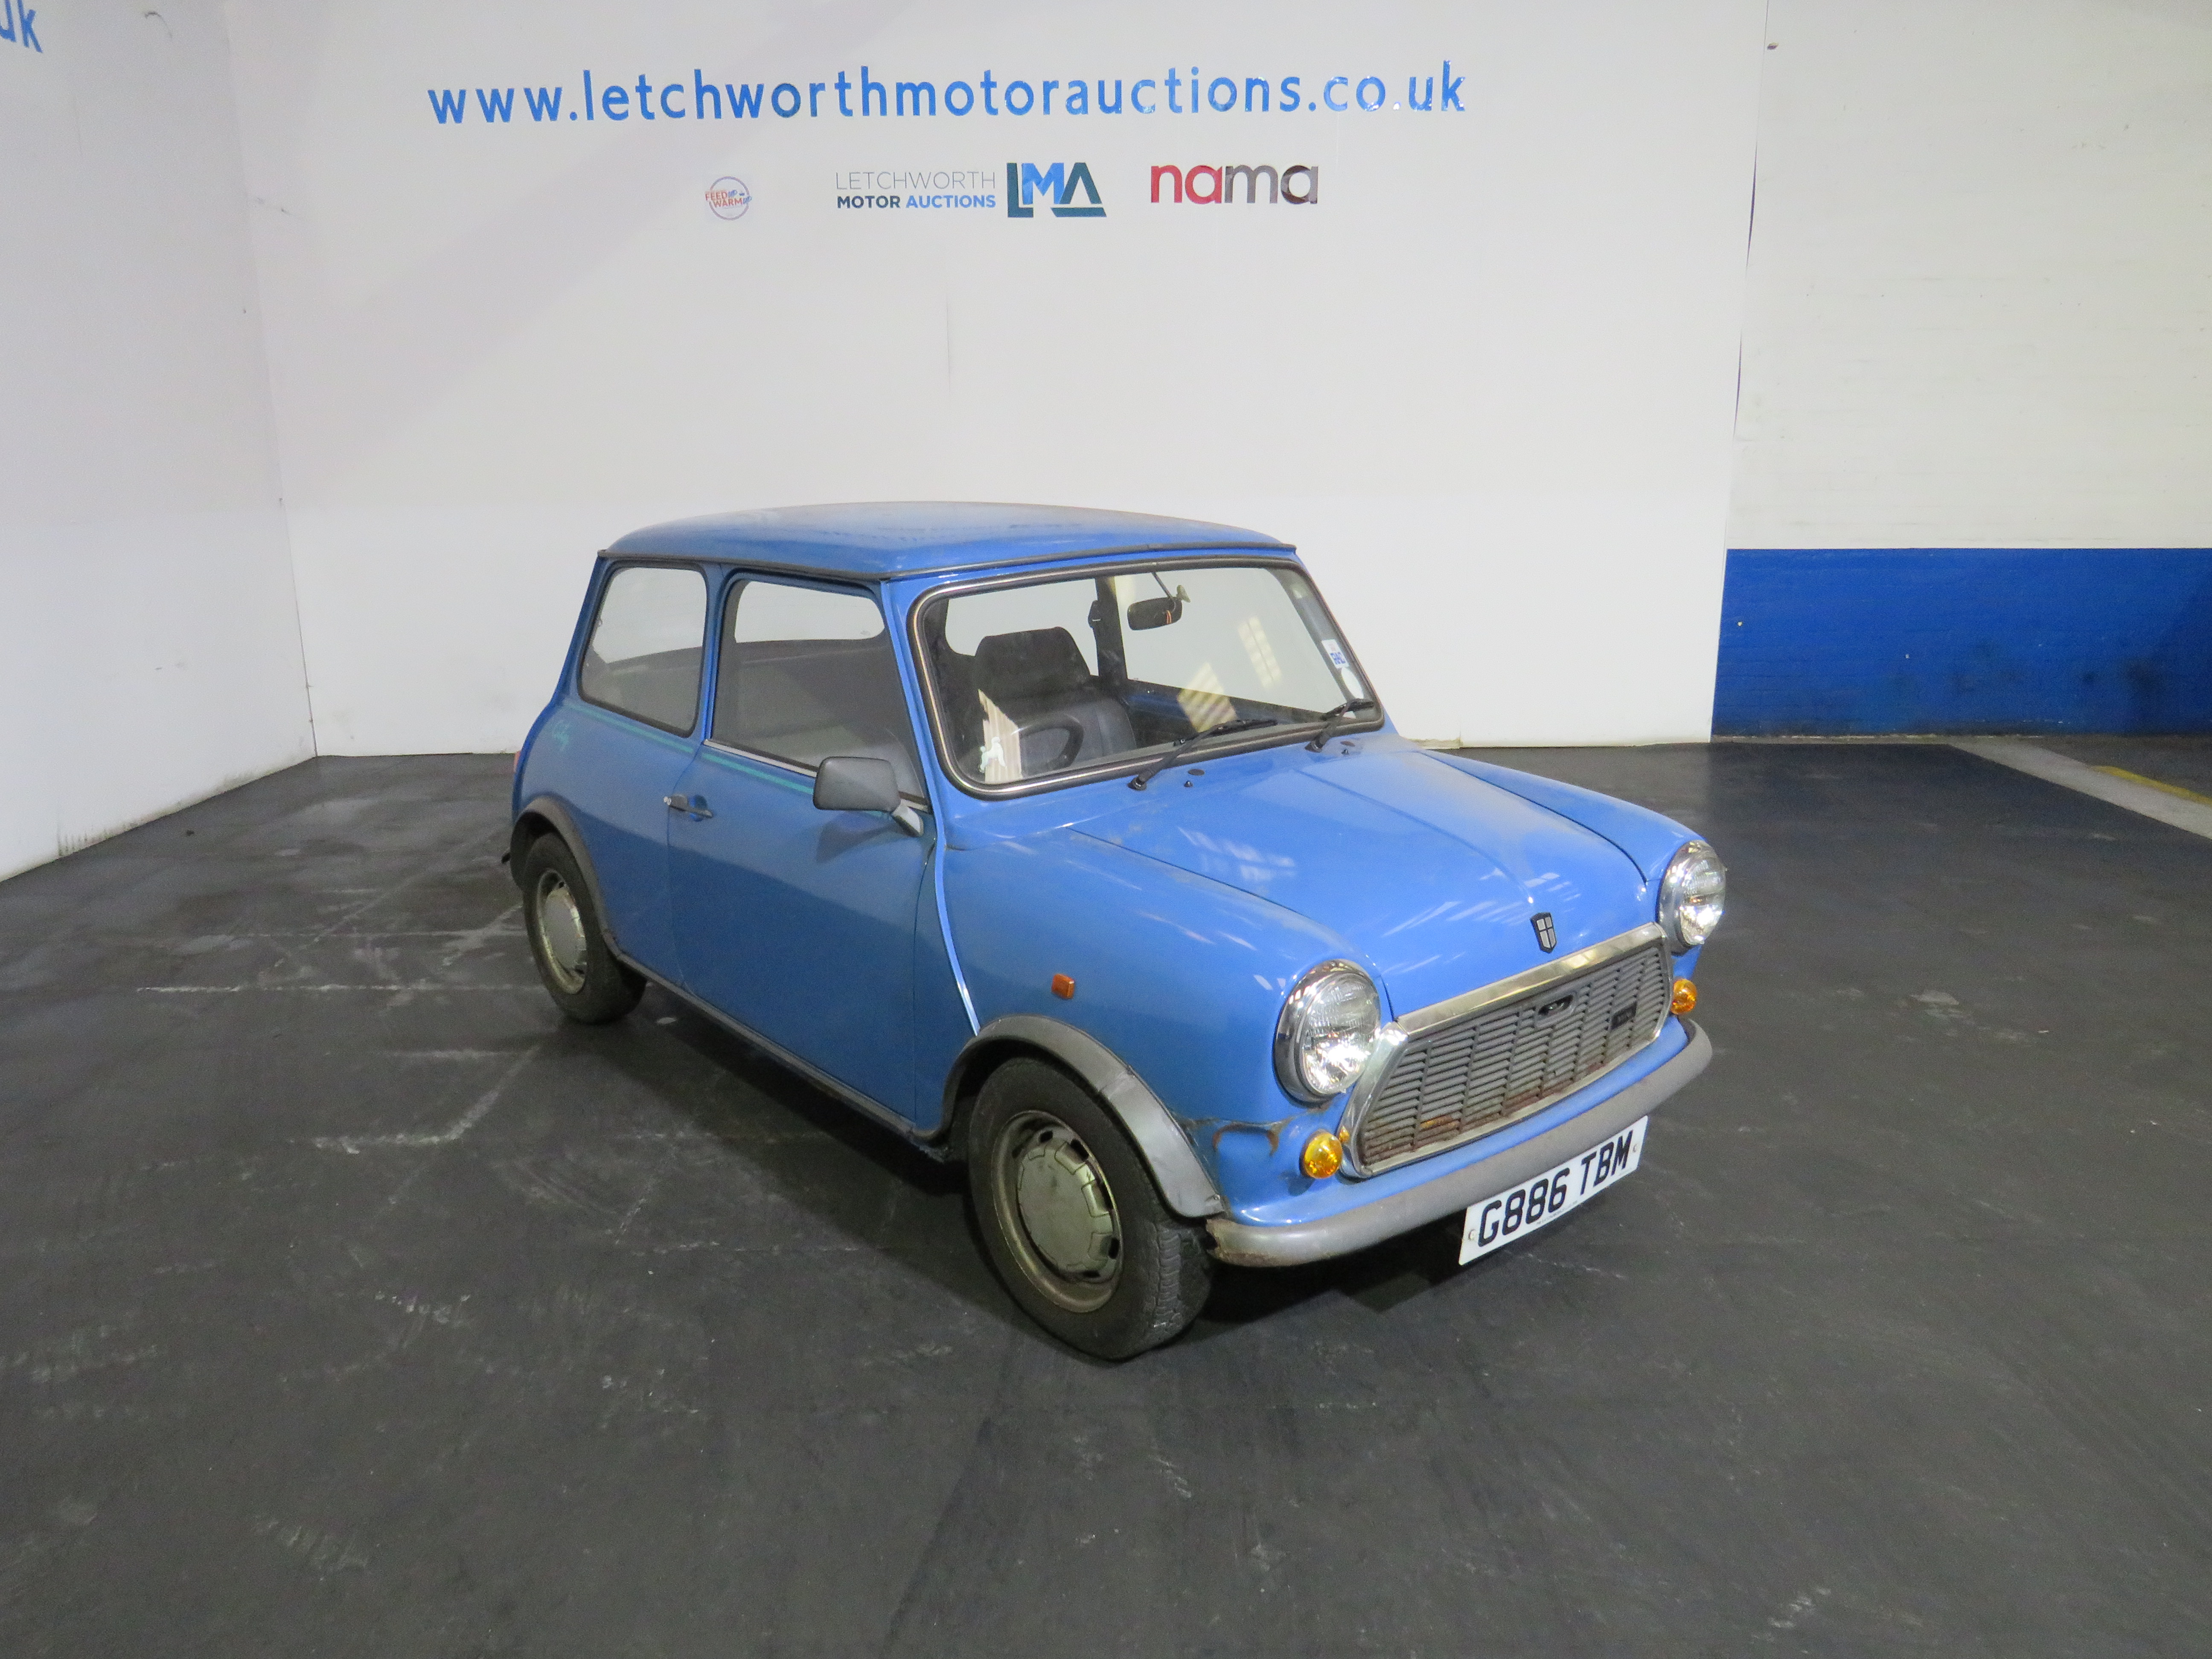 1989 Austin Mini 1000 City E - 998cc - ONE OWNER FROM NEW